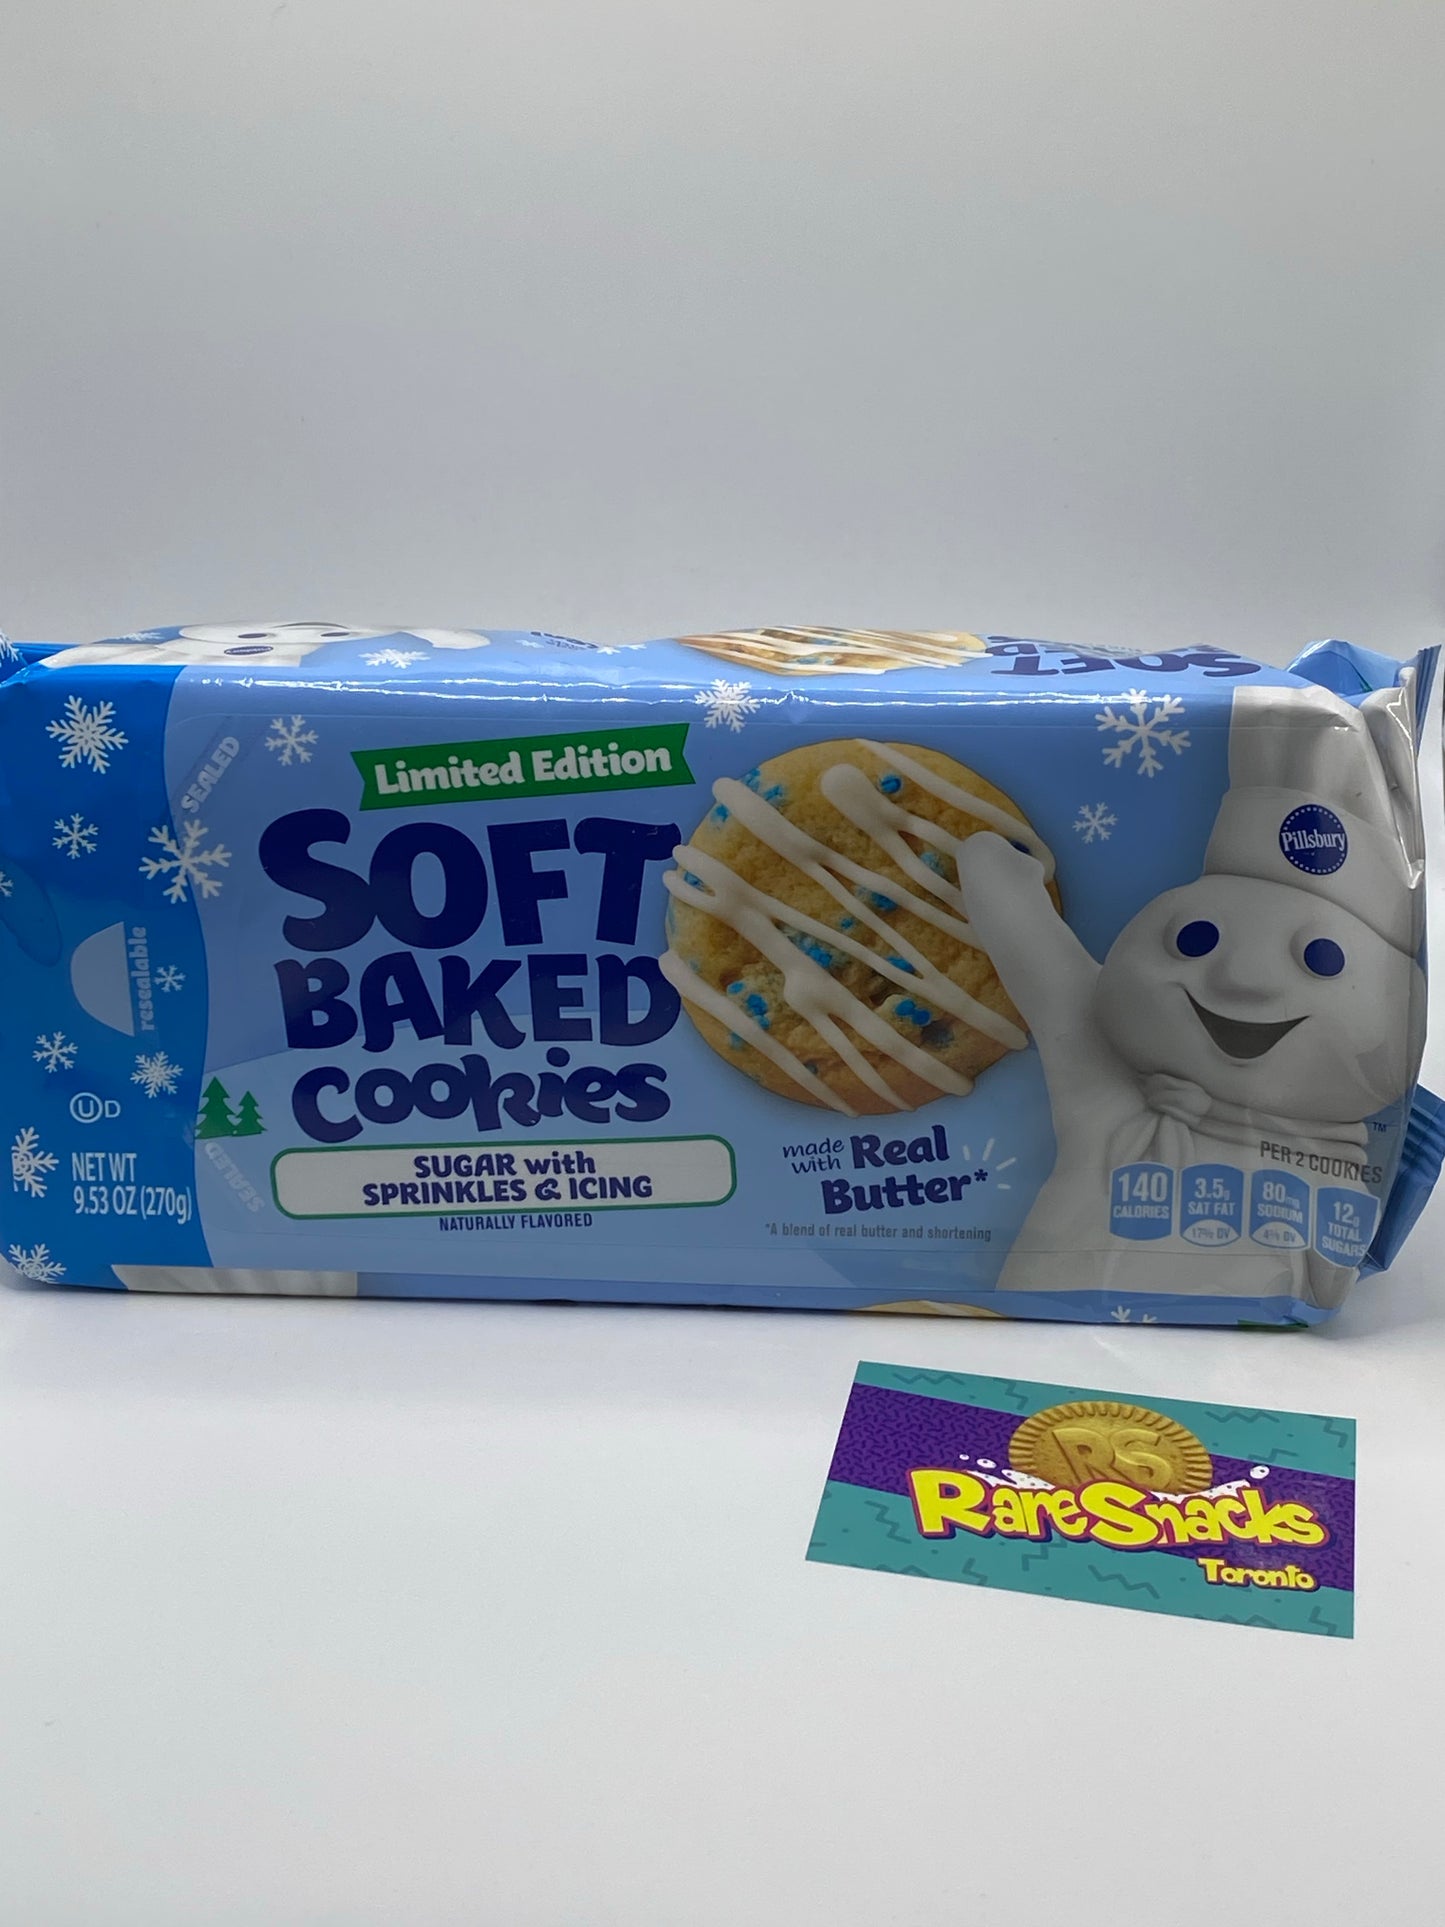 Pillsbury soft baked sugar cookies with sprinkles and icing